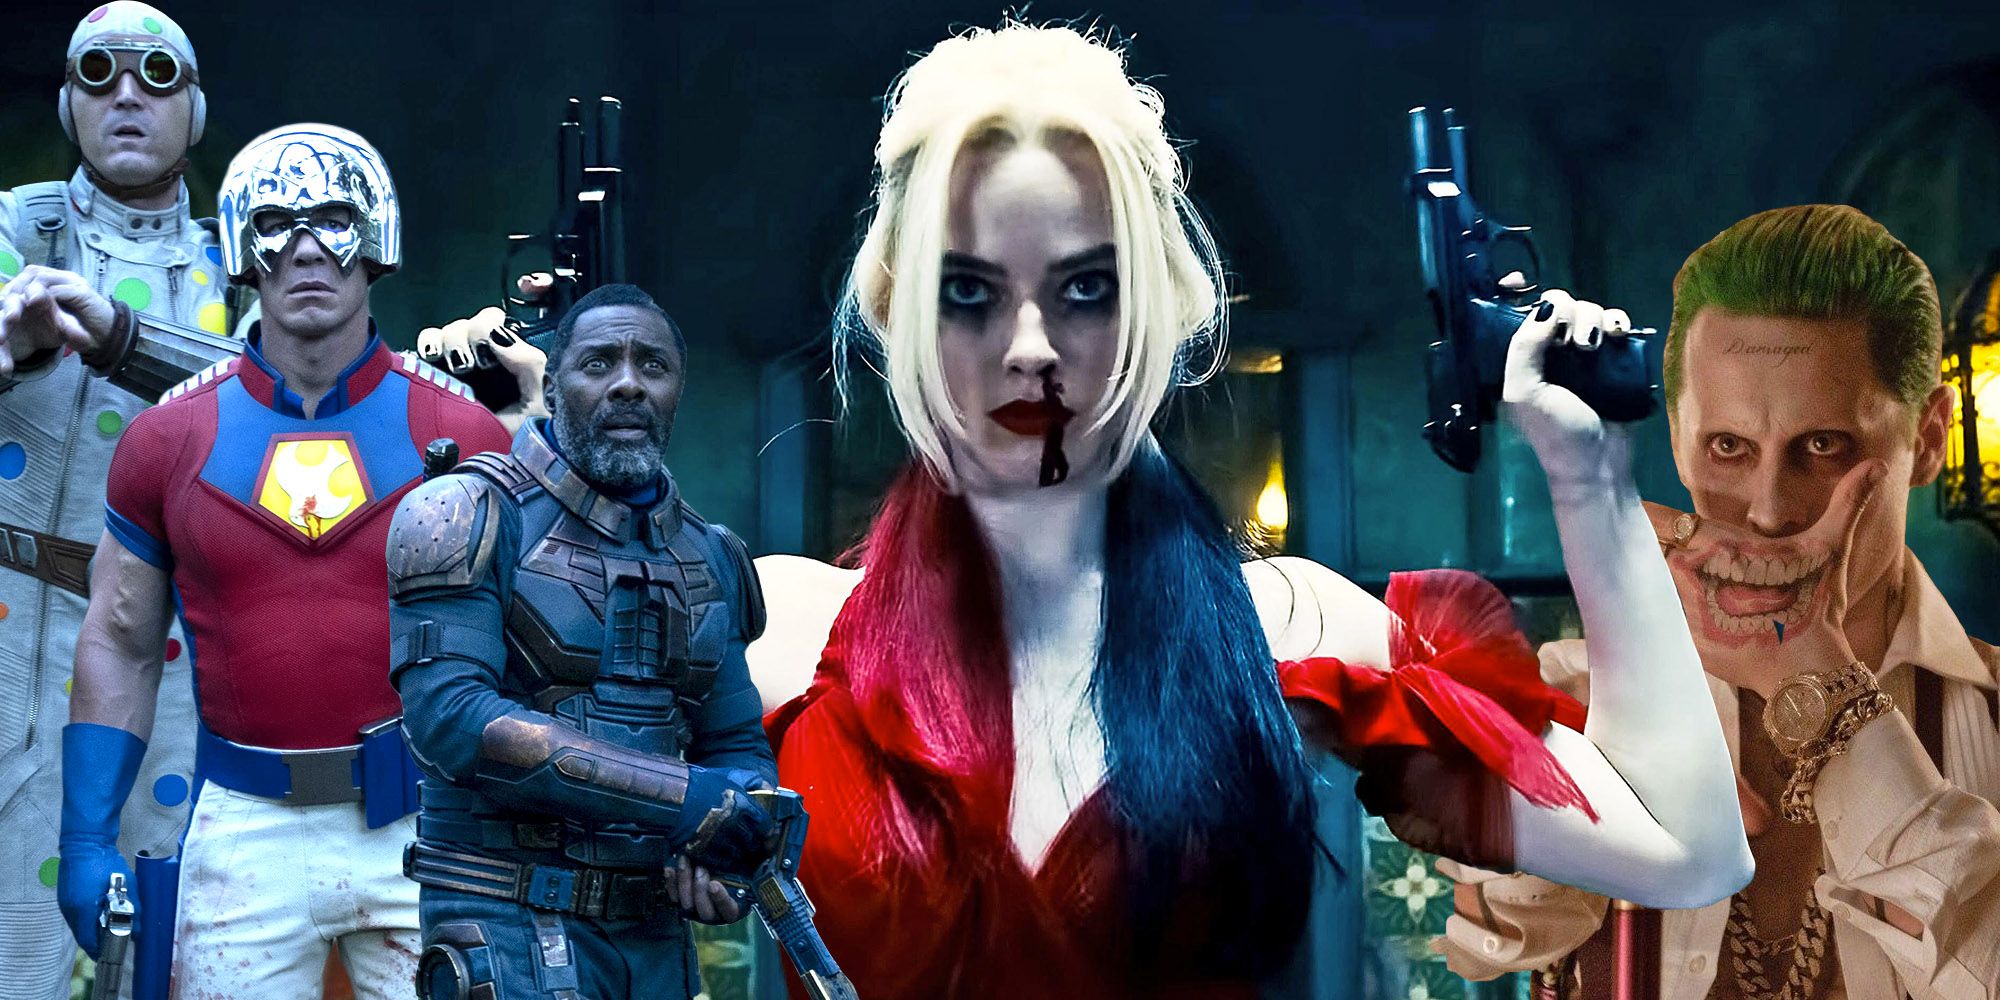 The Suicide Squad's Polka-Dot Man, Peacemaker, and Bloodsport with Harley Quinn and Joker